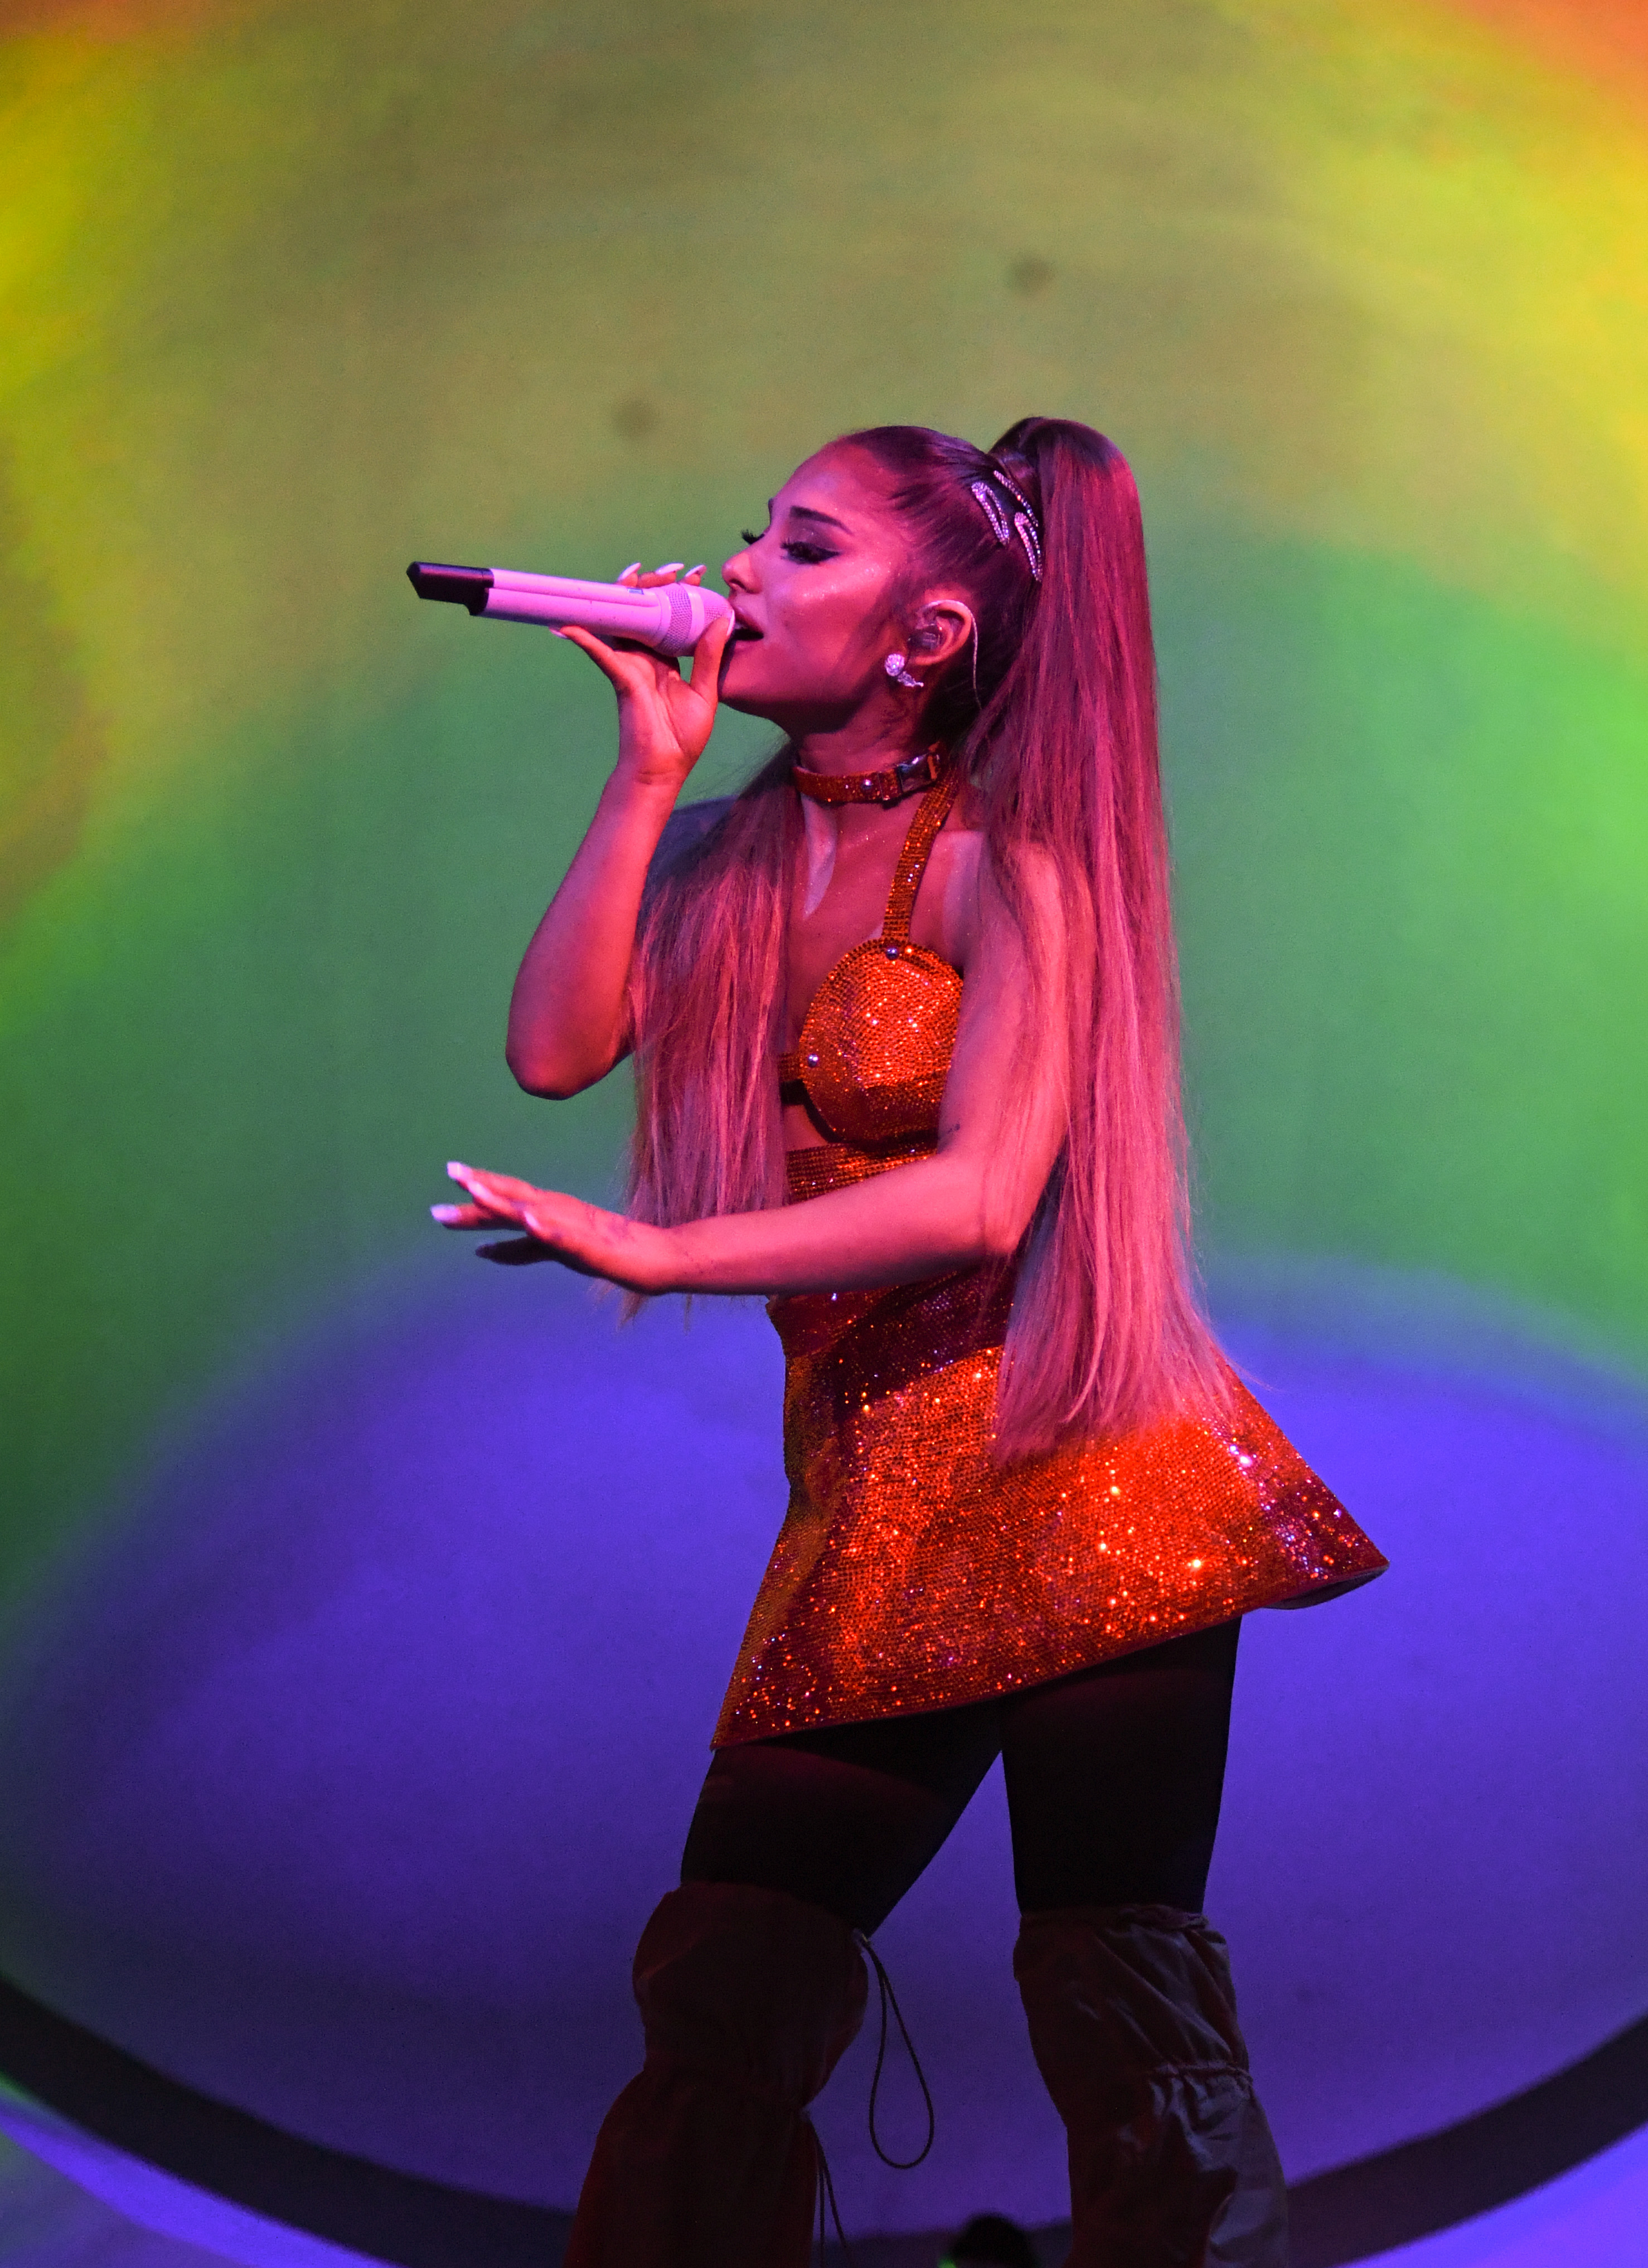 Ariana Grande performing on stage, wearing a sparkly short dress and thigh-high boots, holding a microphone